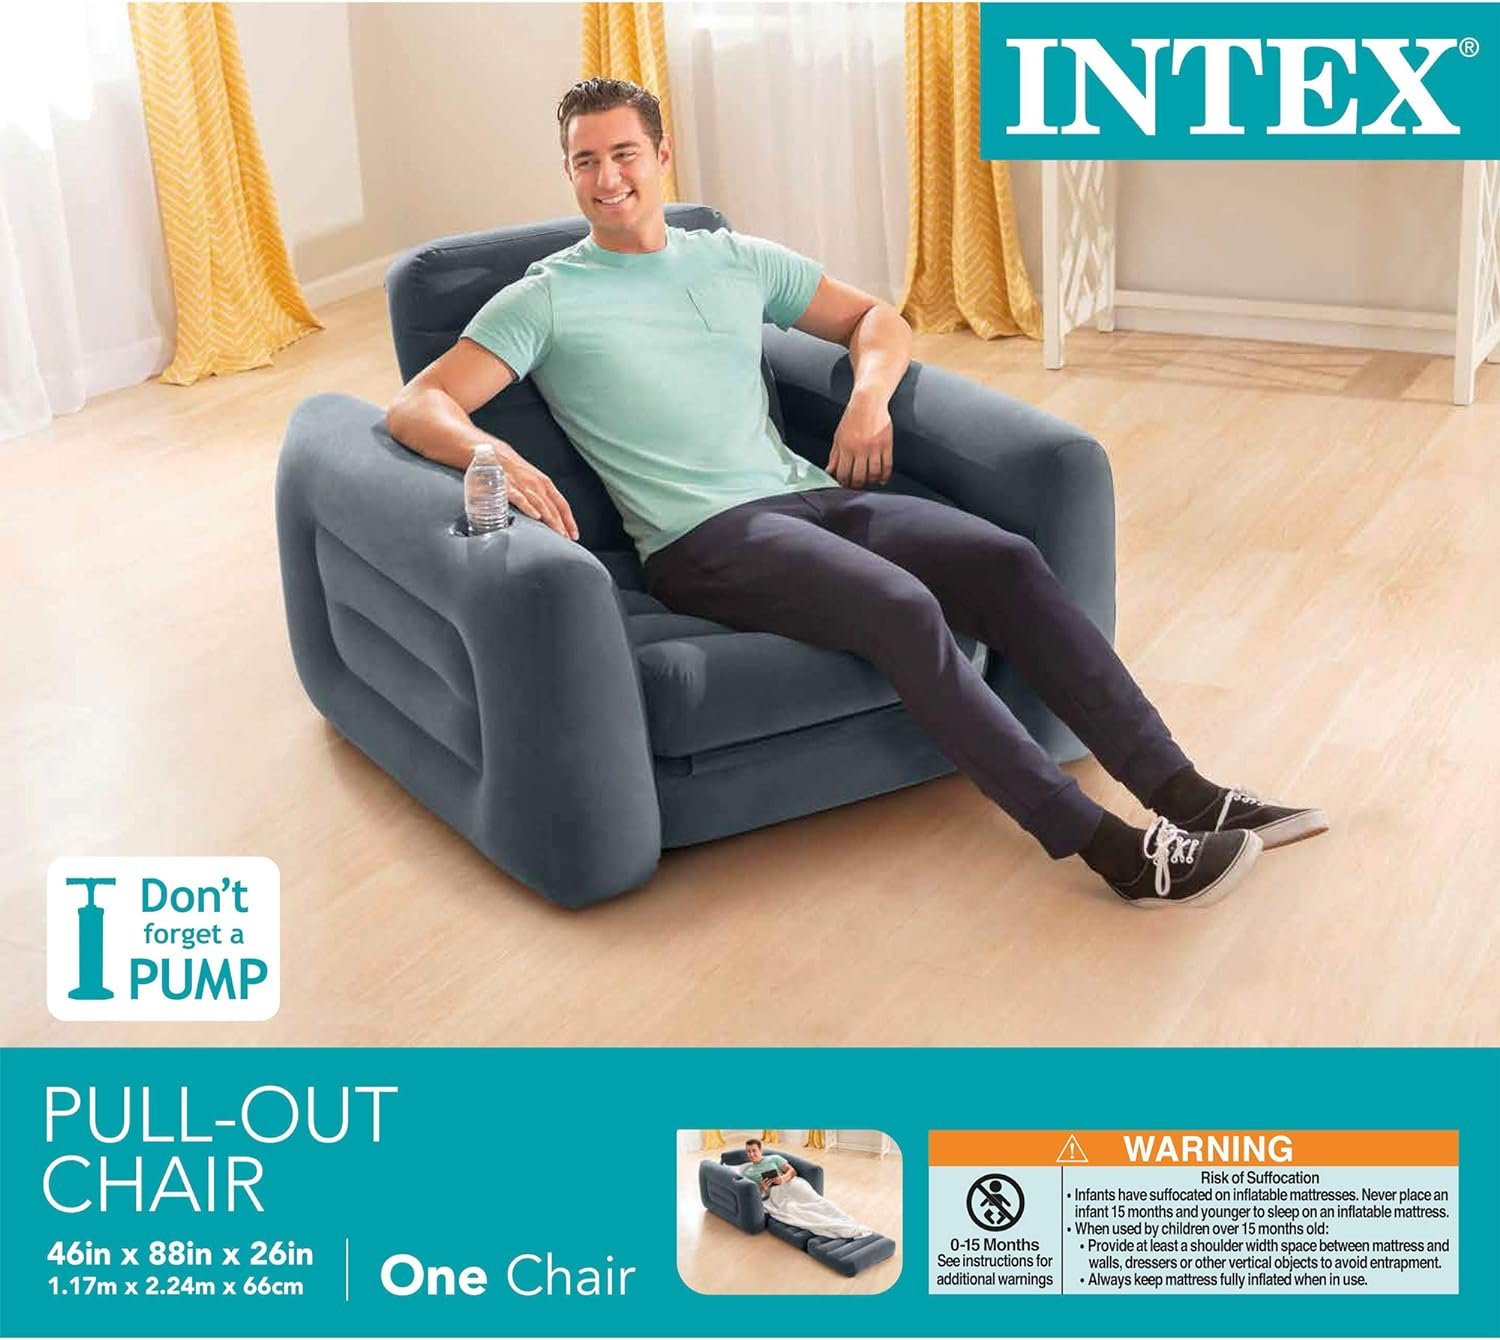 Intex 66551EP Inflatable Pull-Out Sofa Chair Sleeper Review